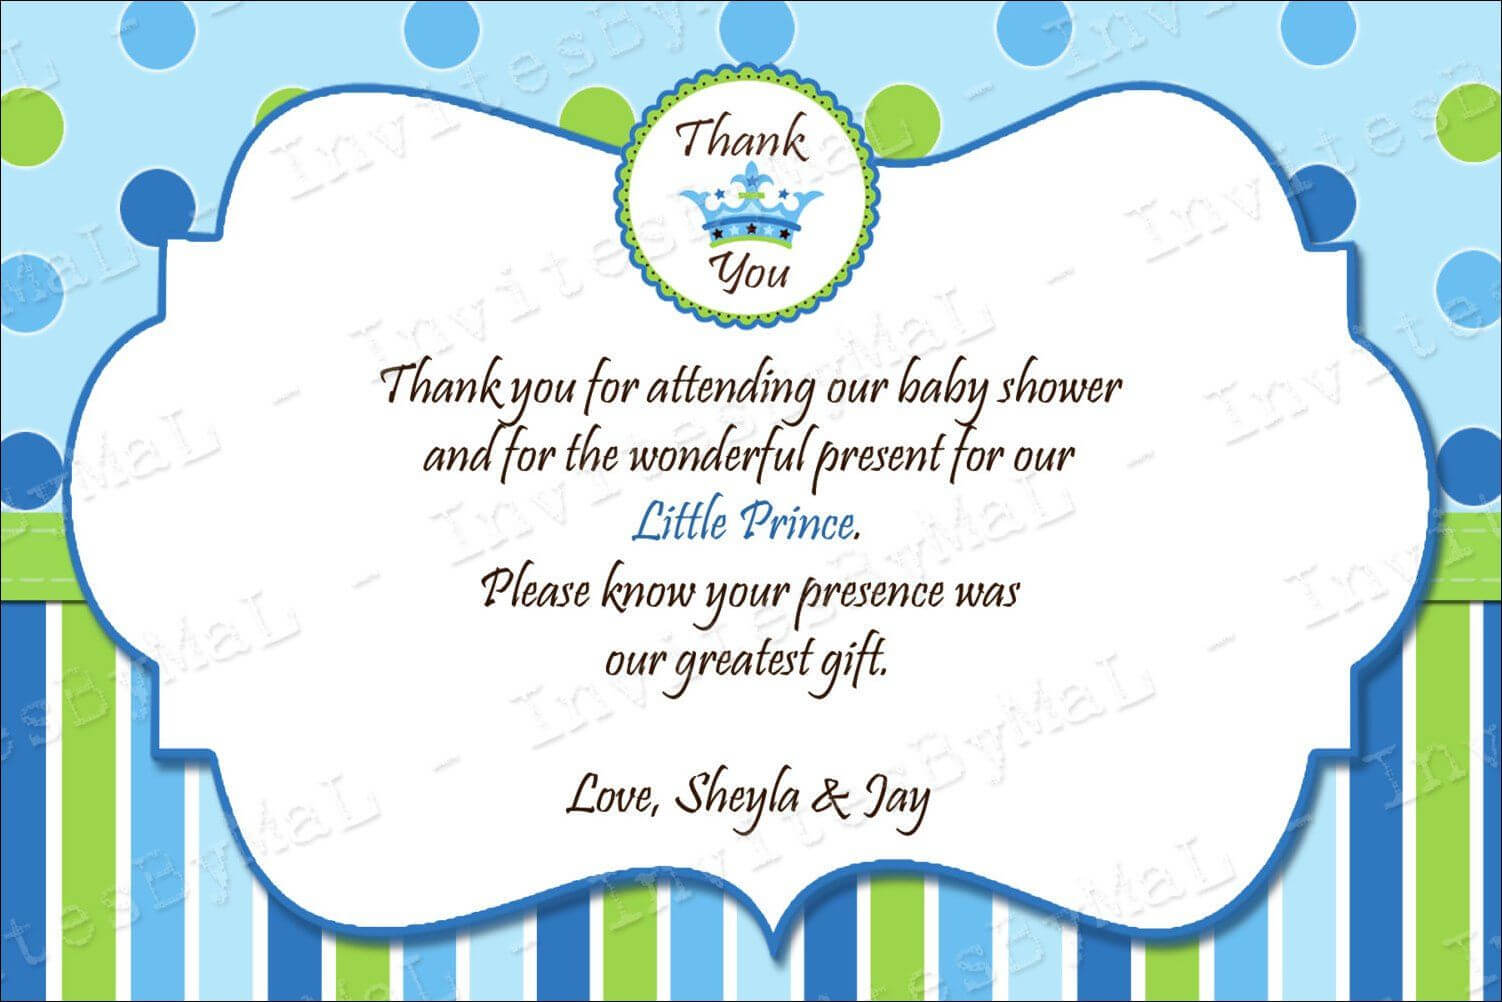 40 Beautiful Baby Shower Thank You Cards Ideas | Baby Shower Intended For Template For Baby Shower Thank You Cards